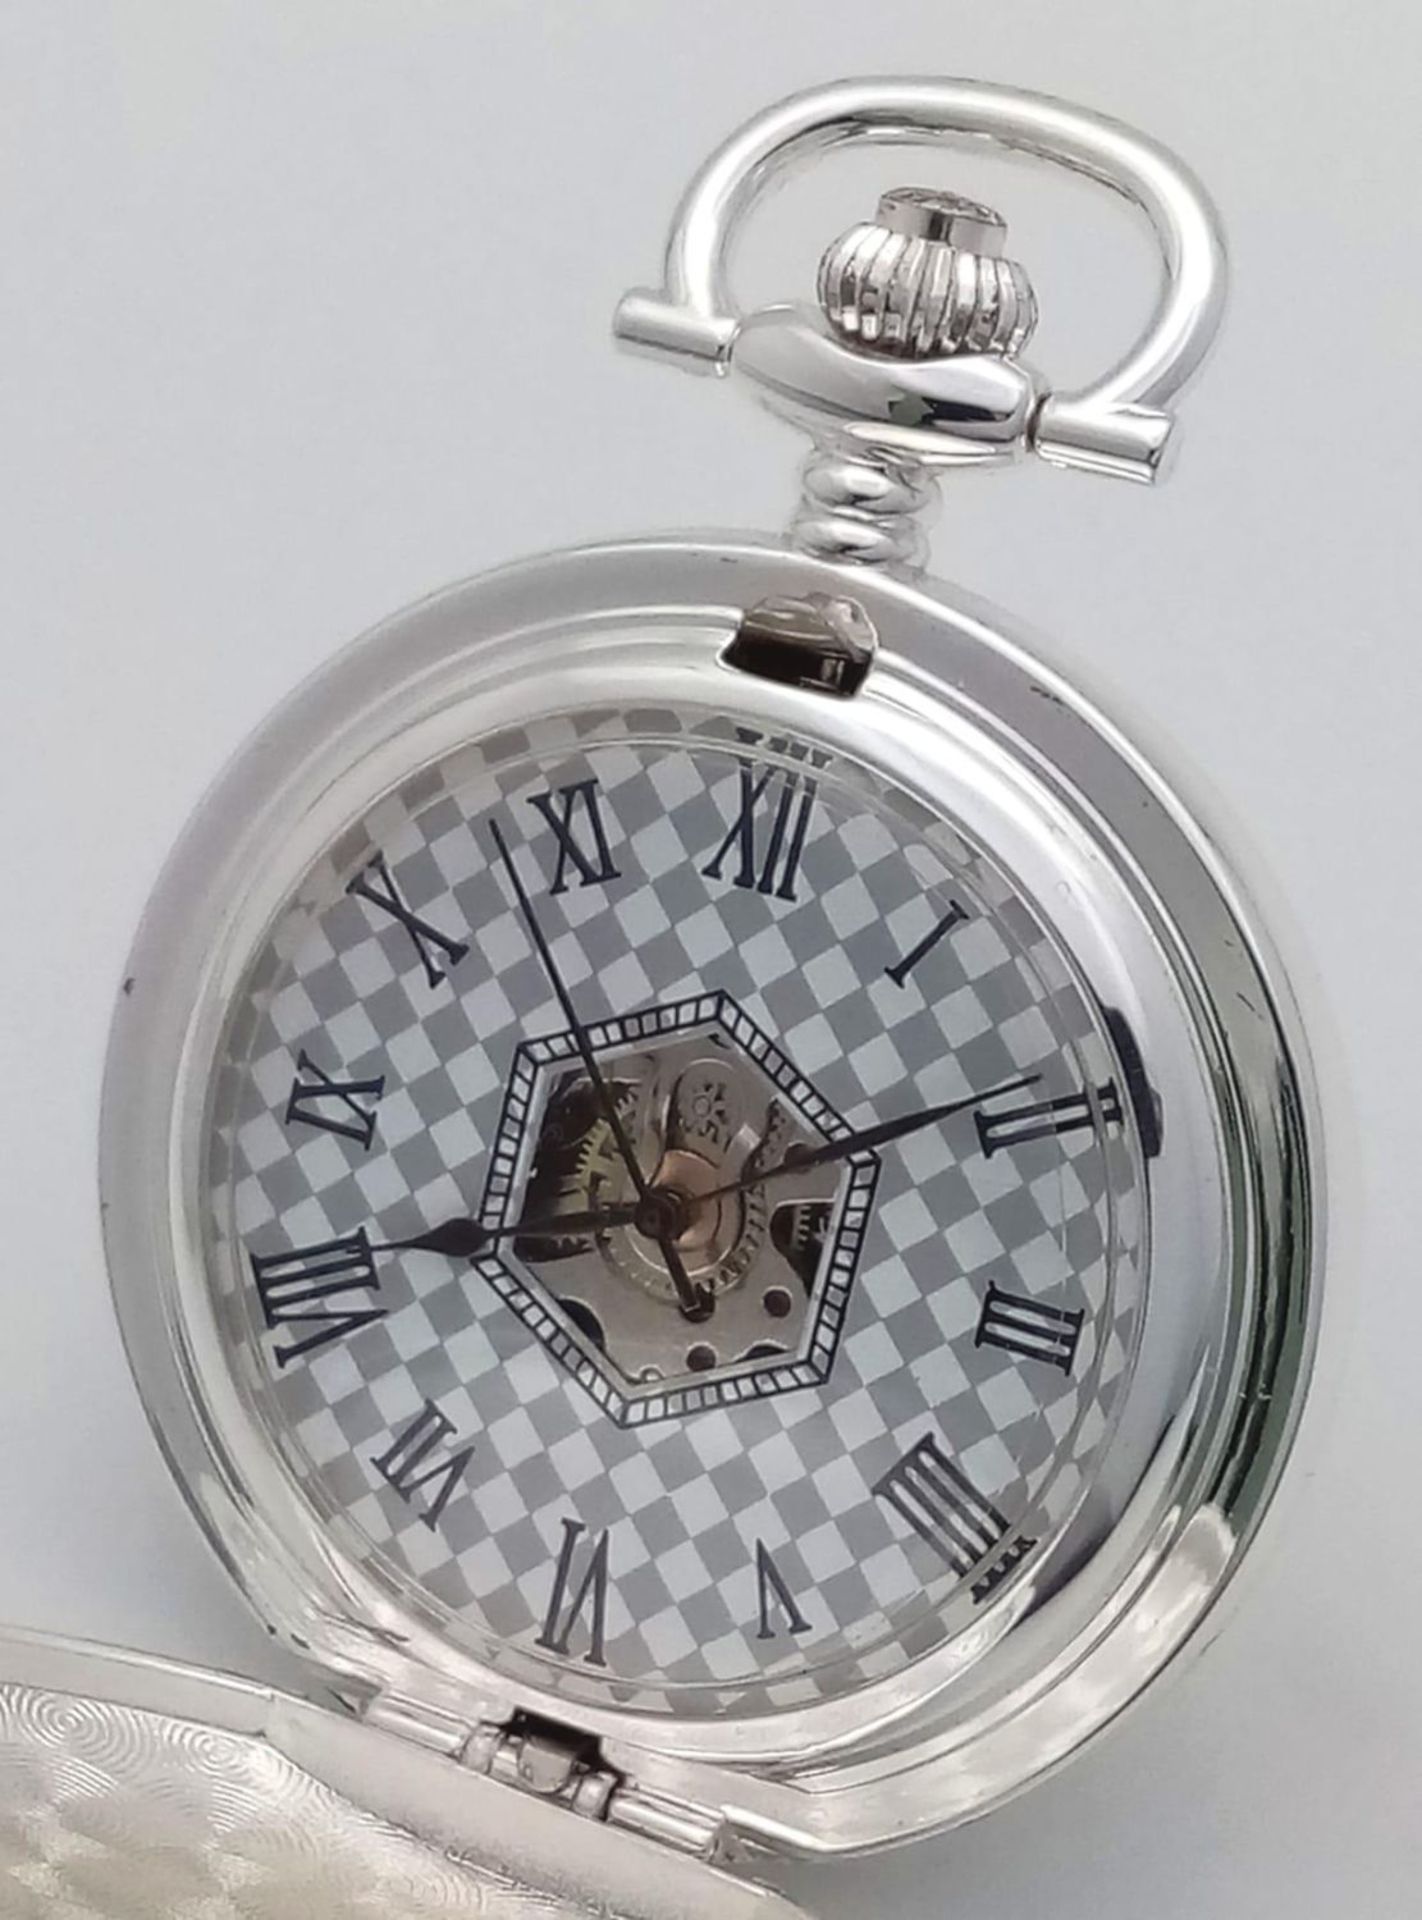 A Silver Tone, Manual Wind Pocket Watch Commemorating the WW2 British Pilots King & Barker in - Image 7 of 10